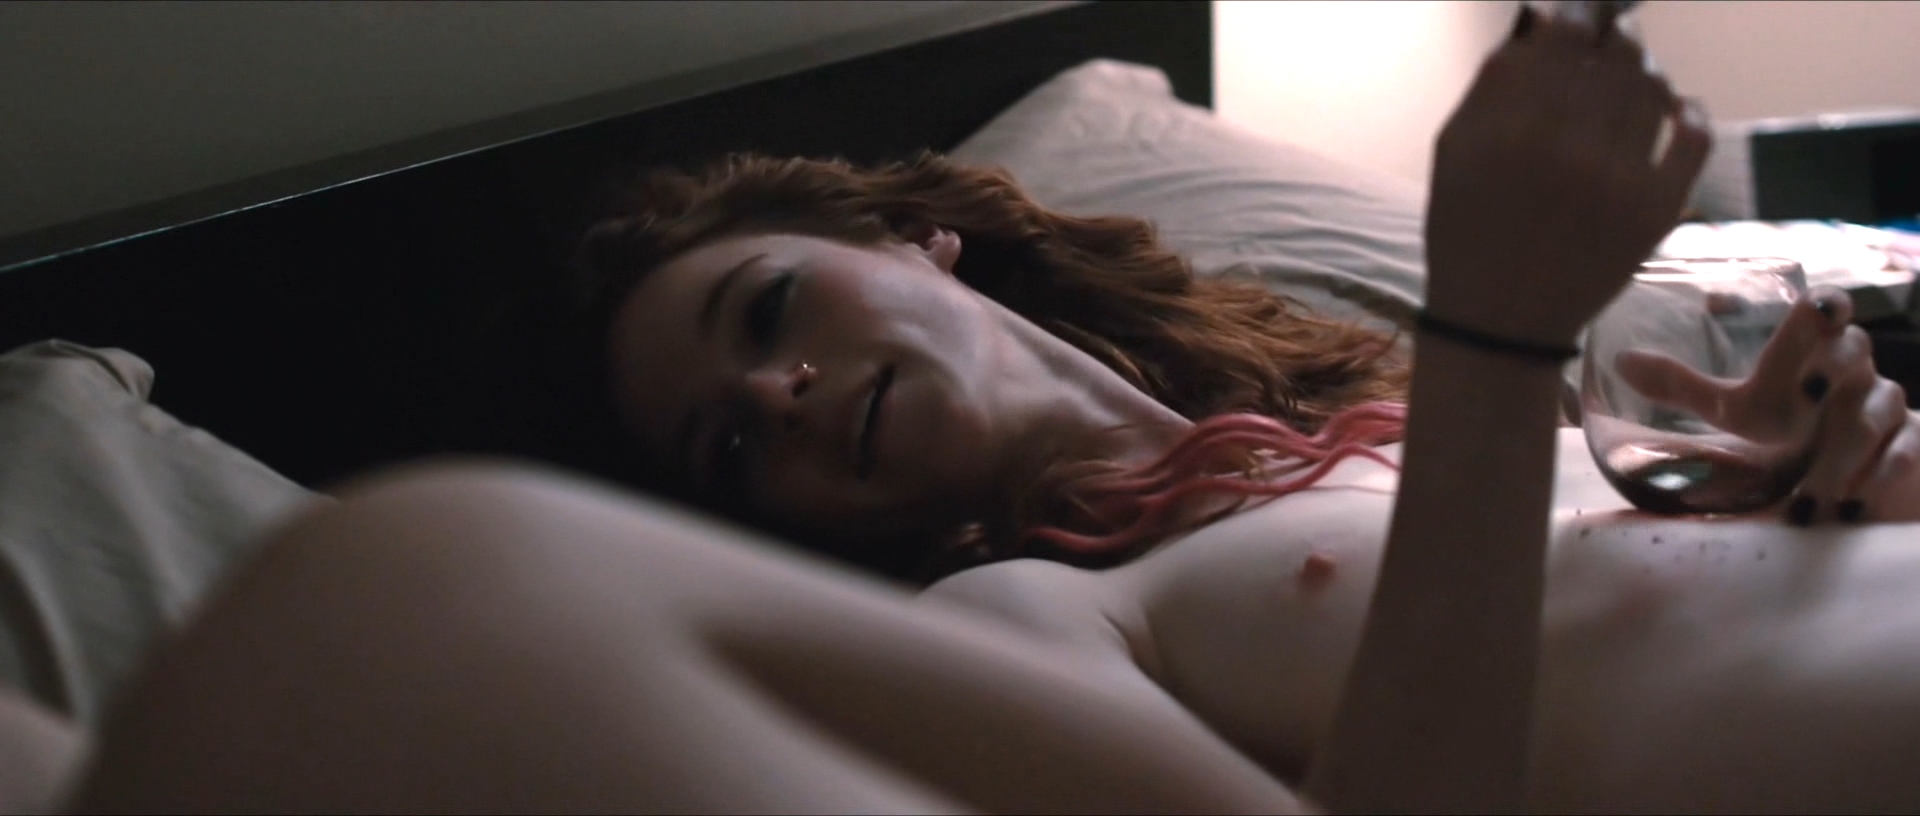 Rose Leslie Enjoys Her Post-Coital Cigarette with Her Tits Exposed.